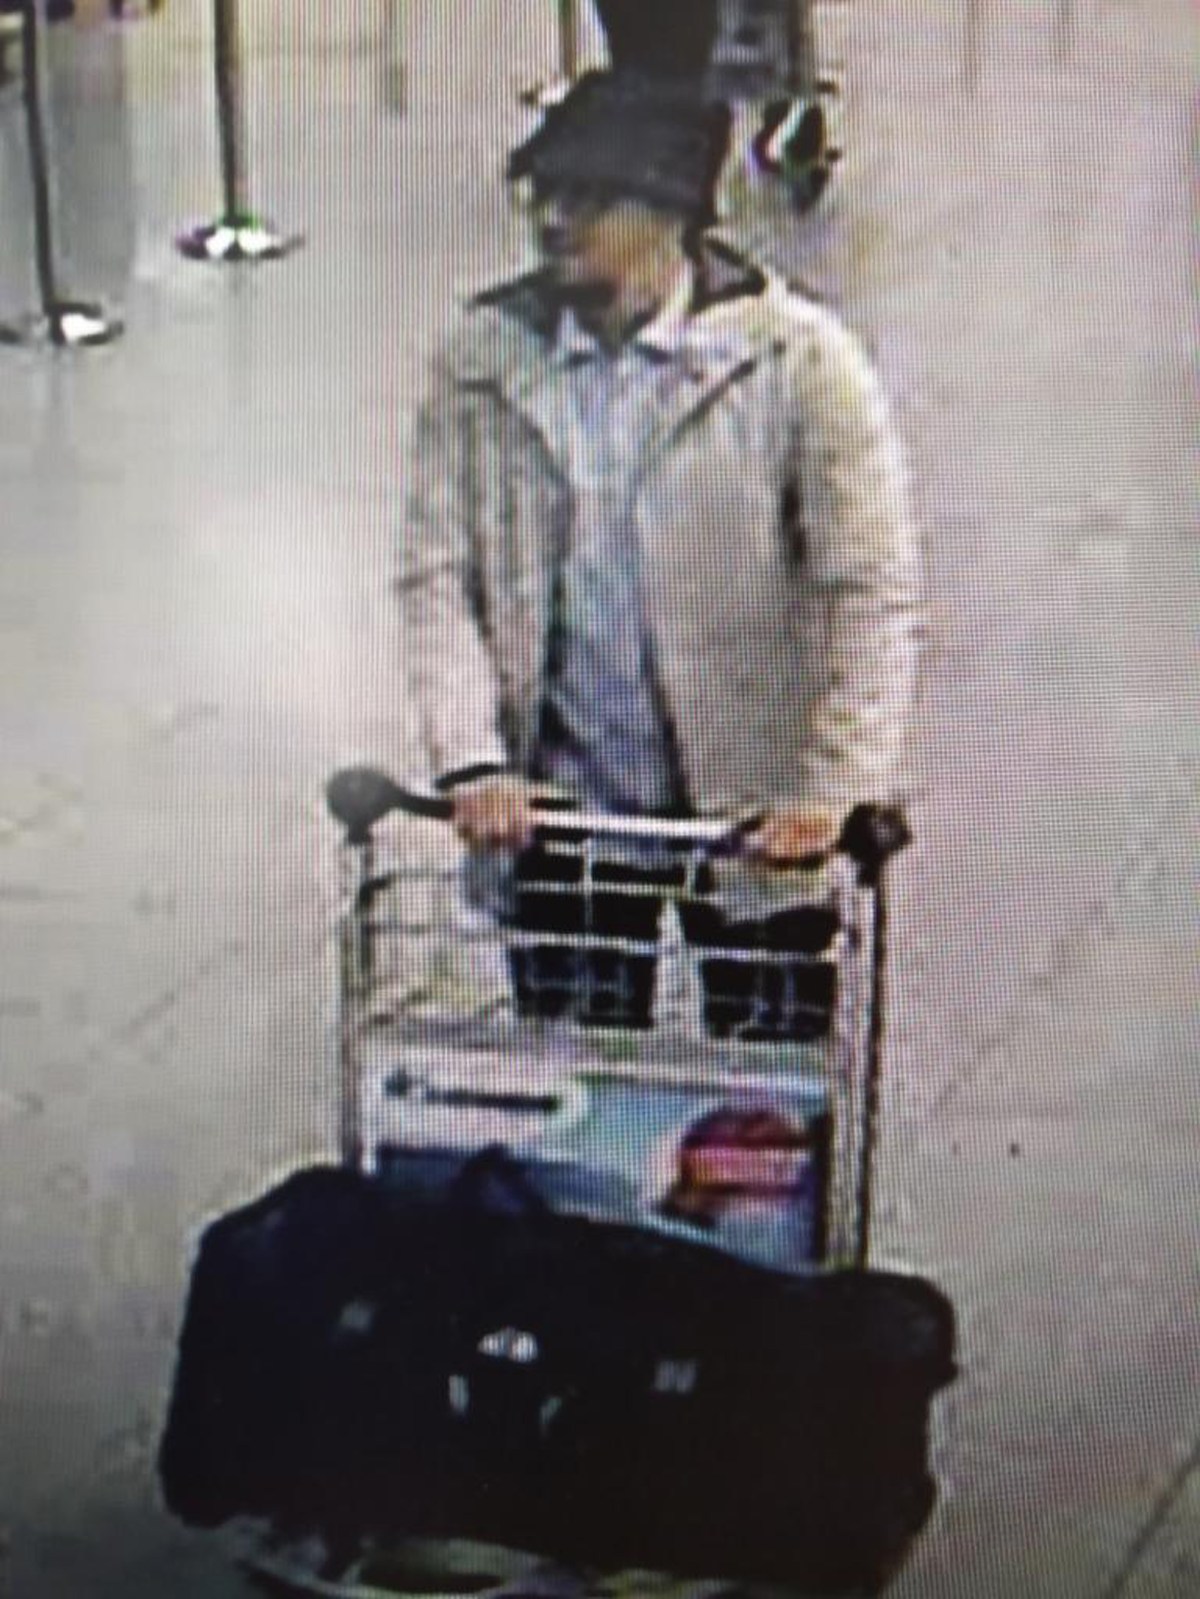 An image of a man who is suspected of taking part in the attacks at Belgium's Zaventem Airport and is being sought by police. Photo: Belgian Federal Police via AP